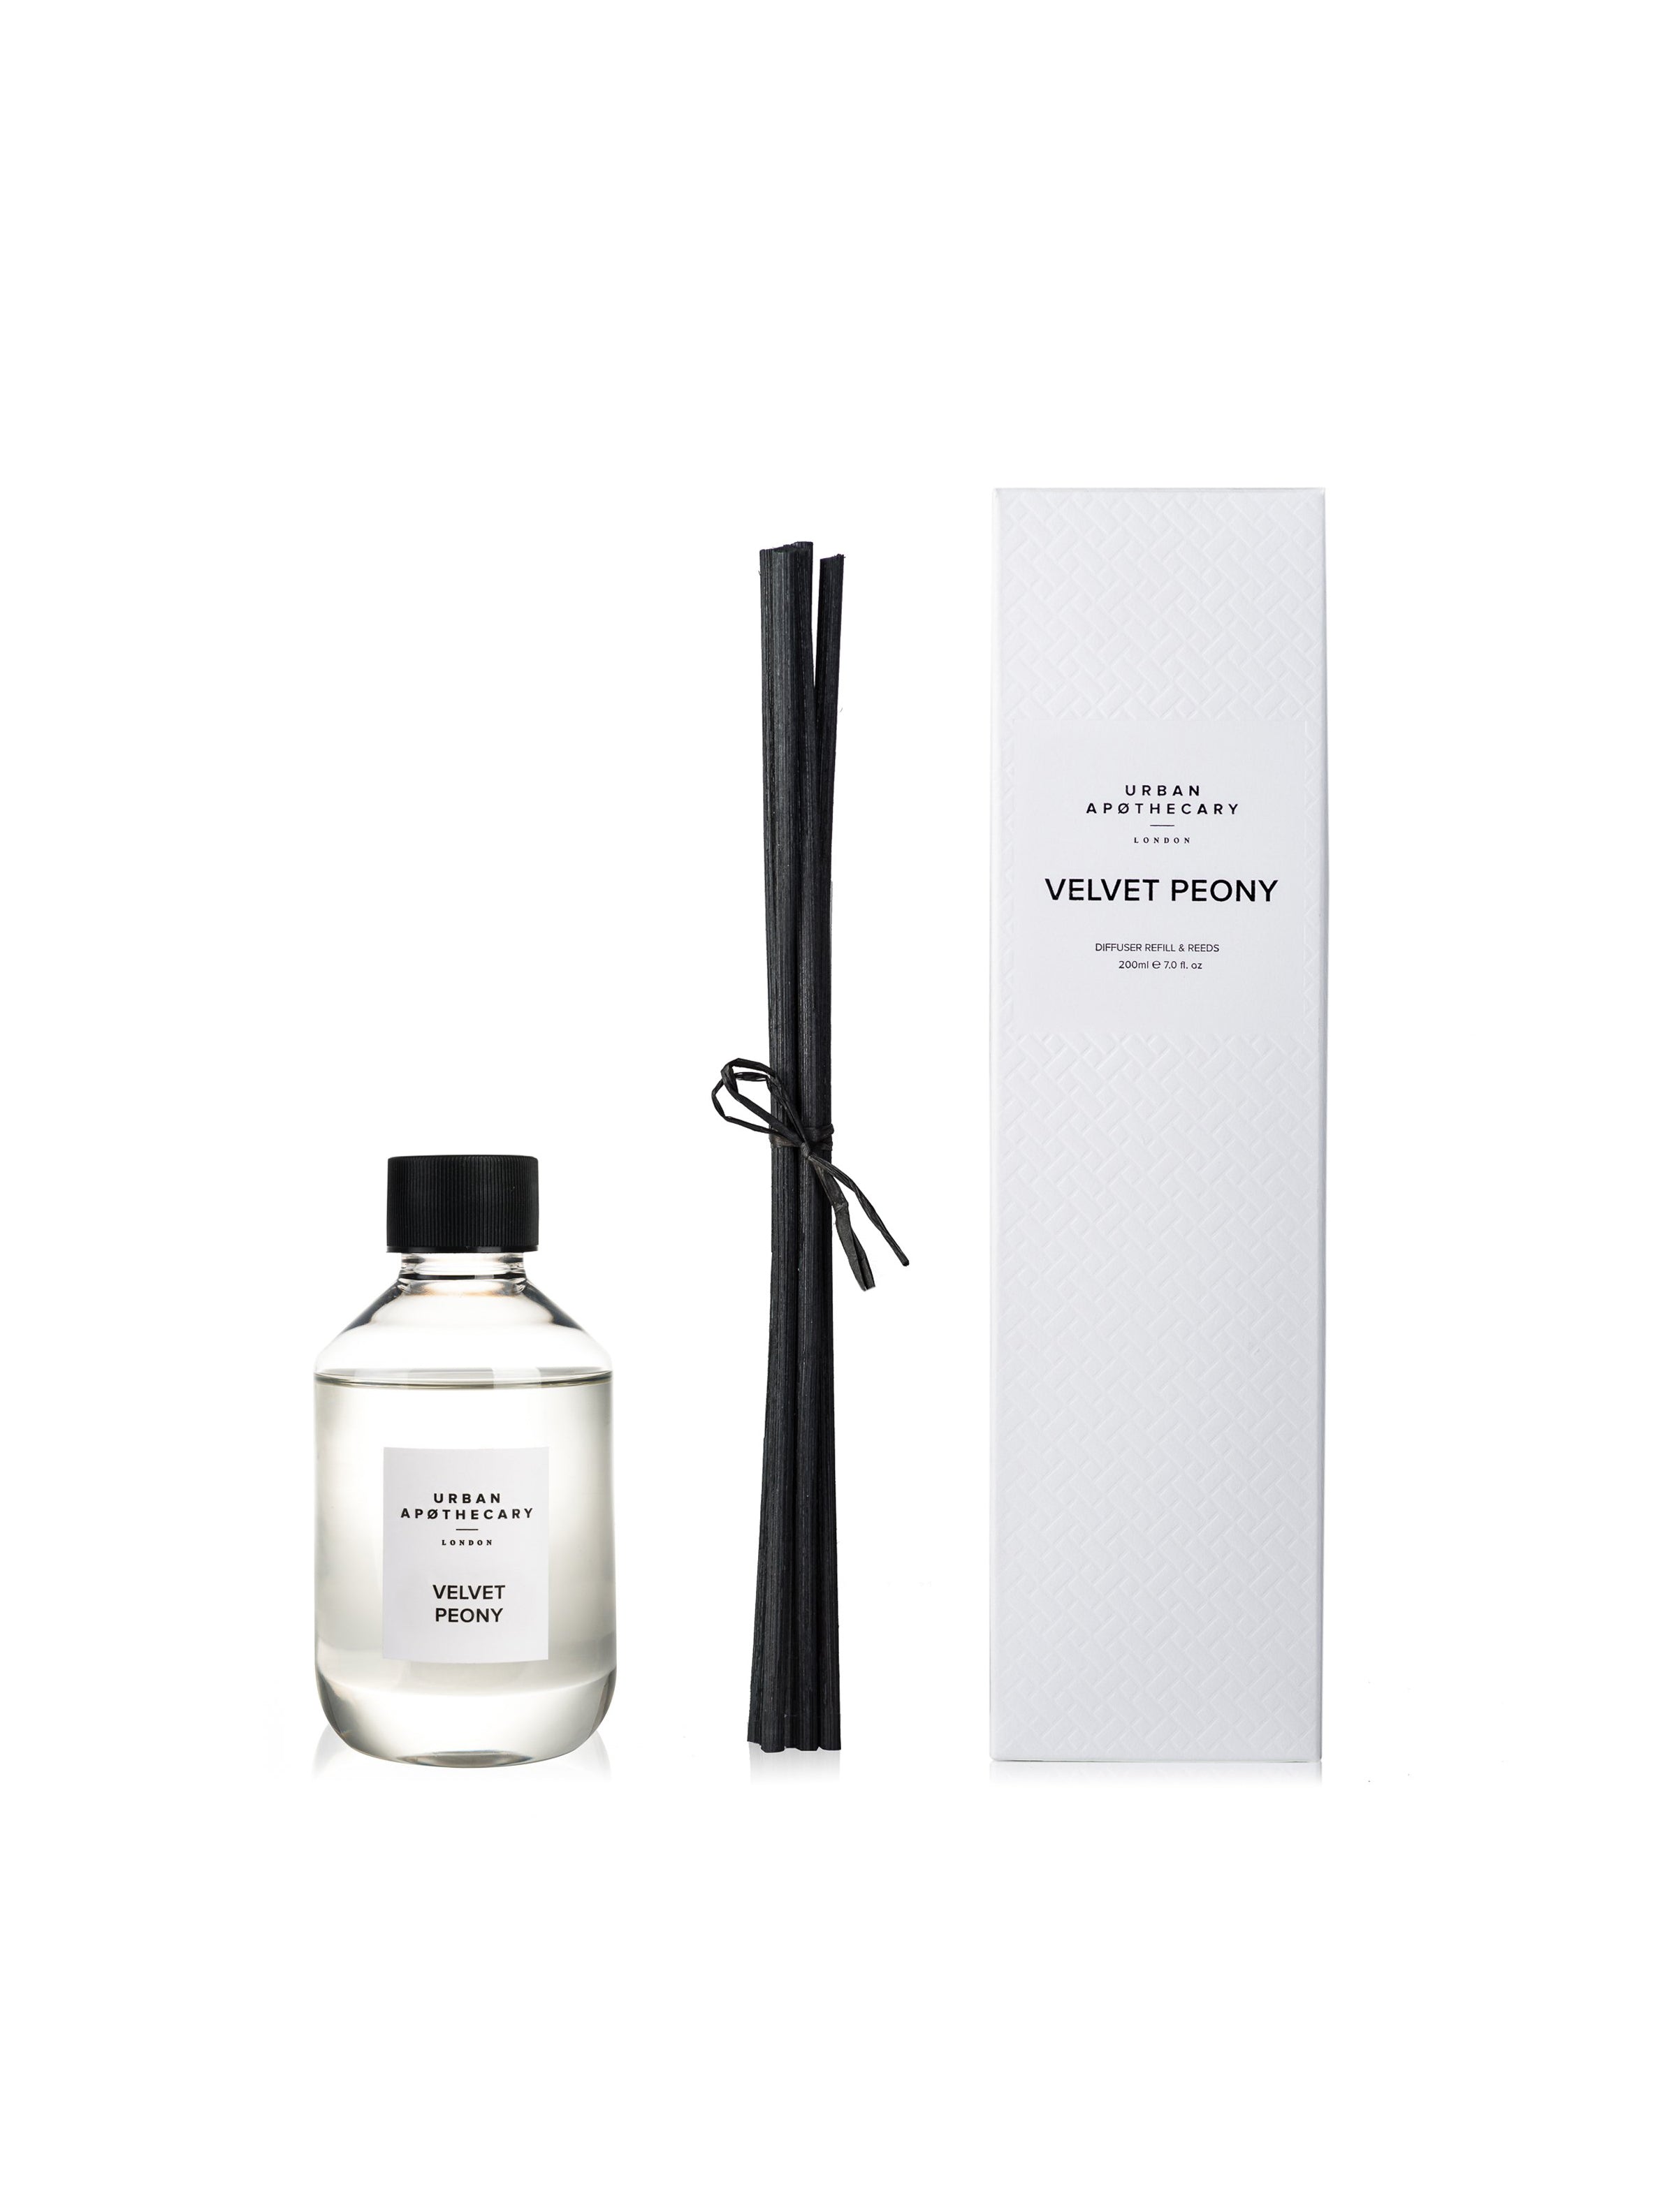 Shop the Urban Apothecary Luxury Velvet Peony Diffuser at Weston Table